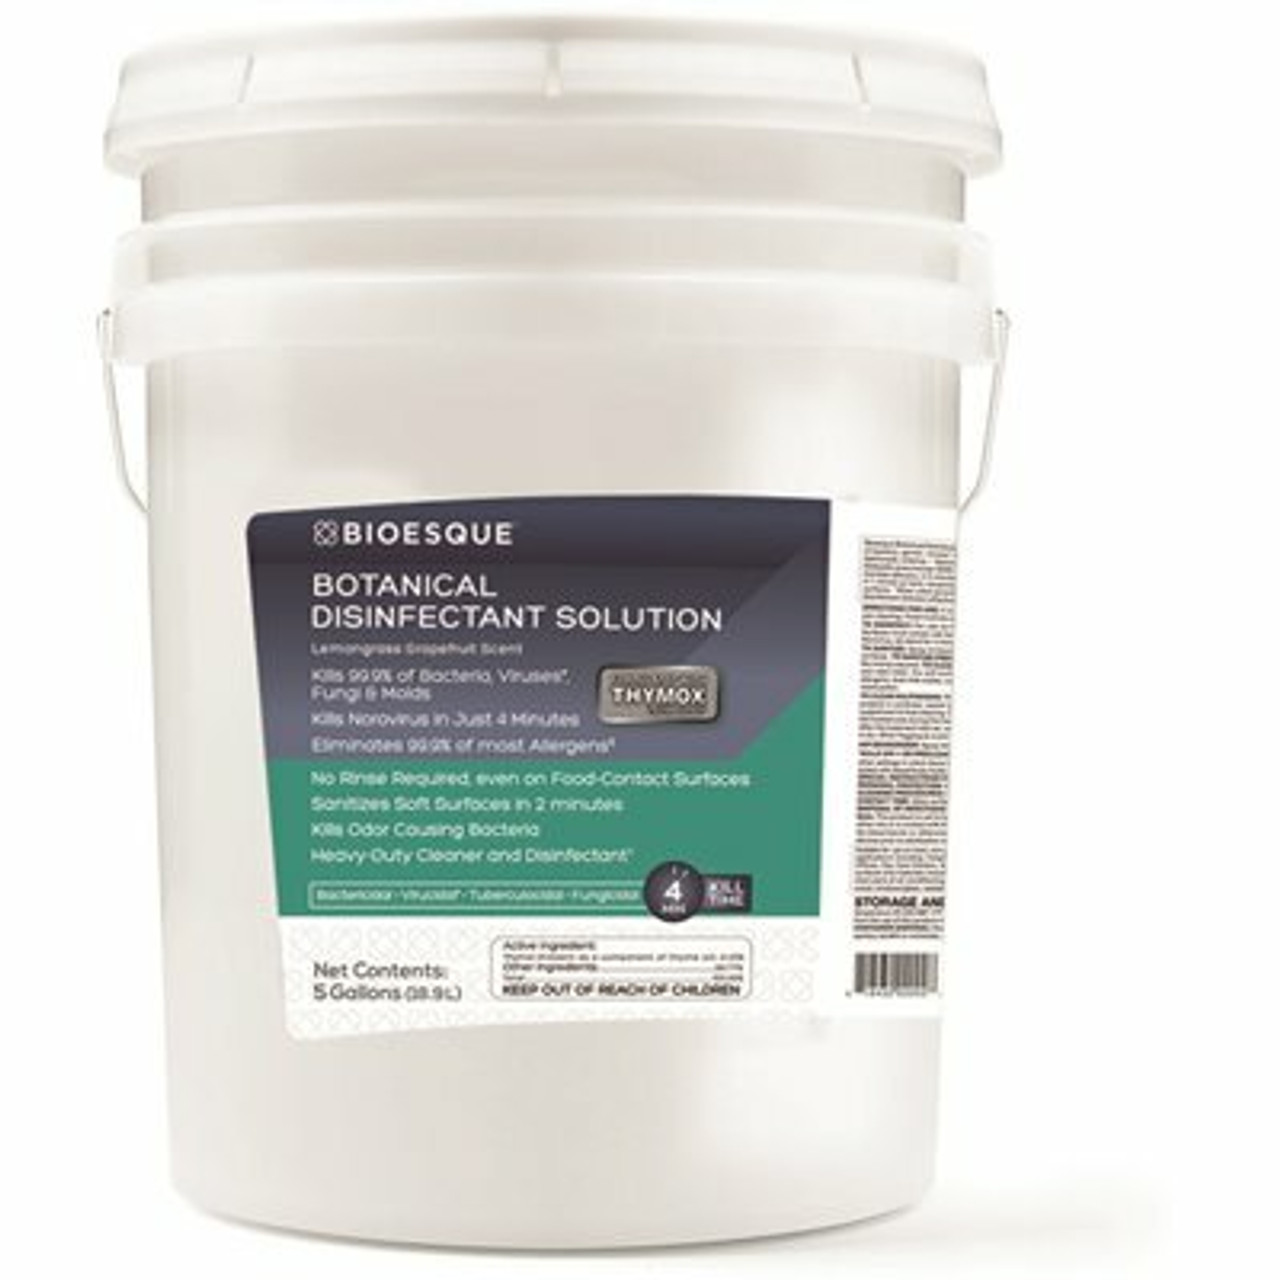 Bioesque 5 Gal. Botanical Disinfectant Solution Pail